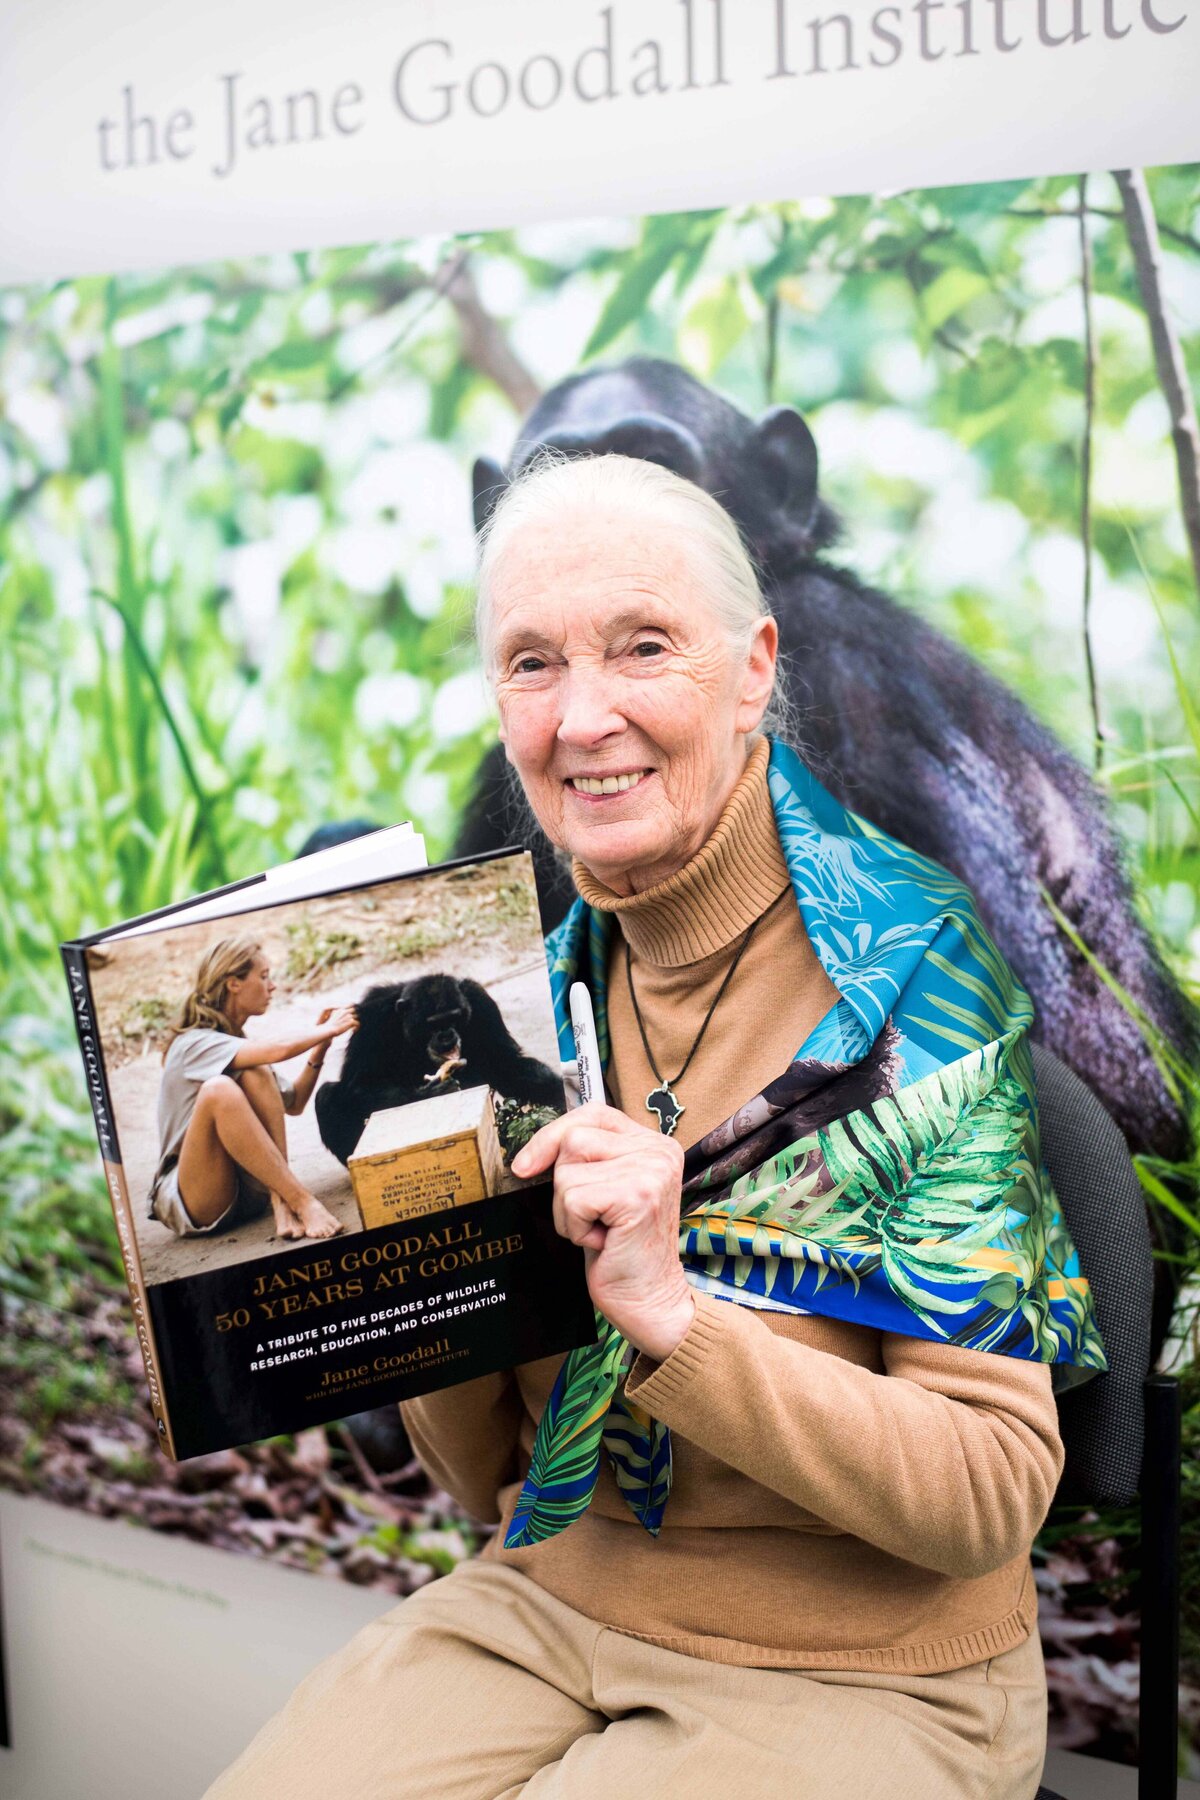 A portrait of Jane Goodall with her book smiling at the camera